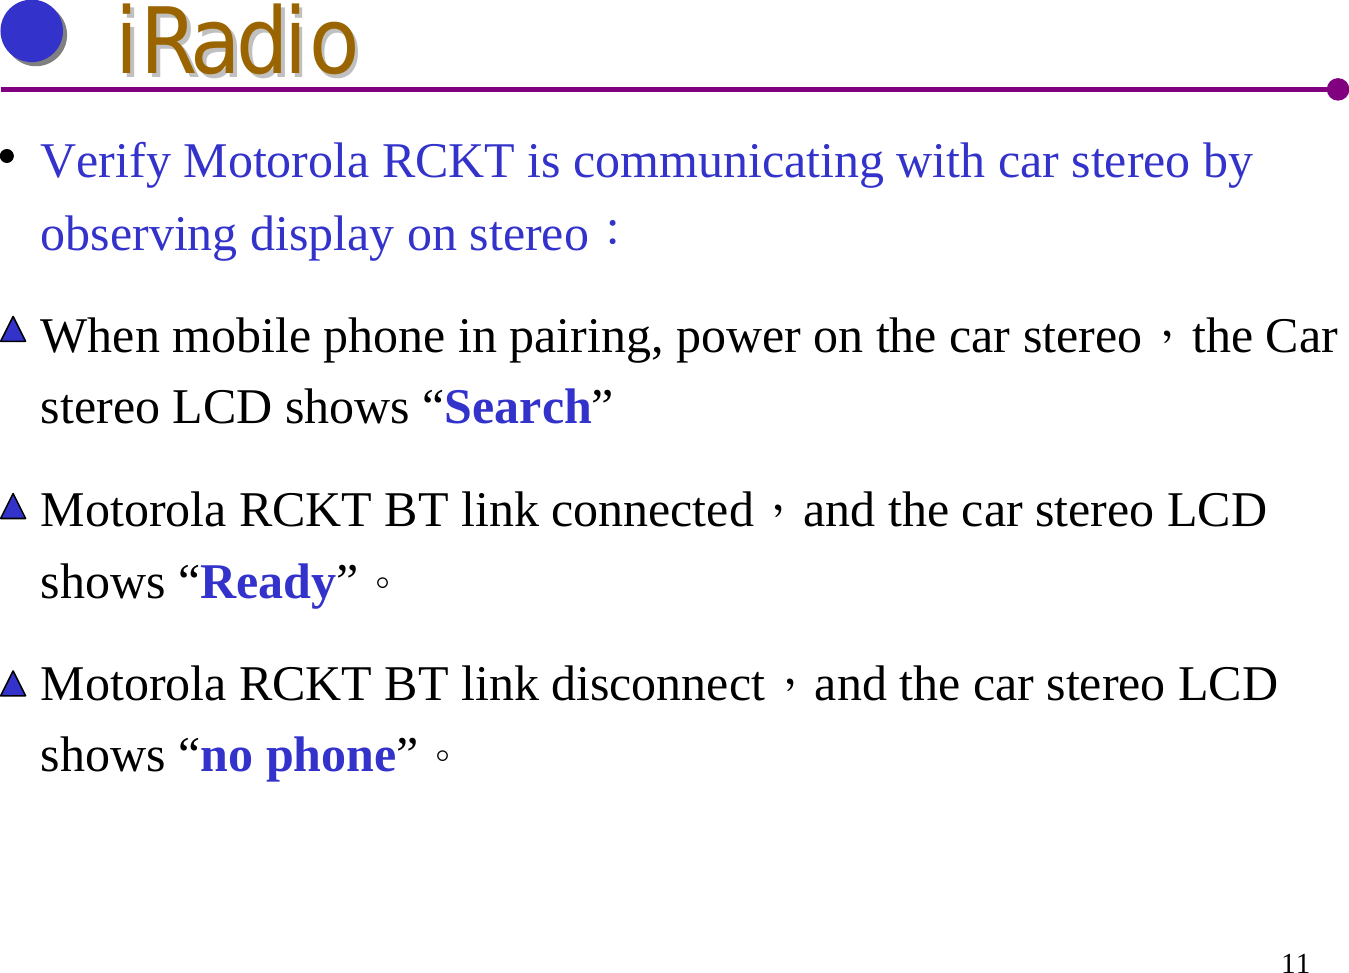 11iRadioiRadioVerify Motorola RCKT is communicating with car stereo by observing display on stereo：When mobile phone in pairing, power on the car stereo，the Car stereo LCD shows “Search”Motorola RCKT BT link connected，and the car stereo LCD shows “Ready”。Motorola RCKT BT link disconnect，and the car stereo LCD shows “no phone”。